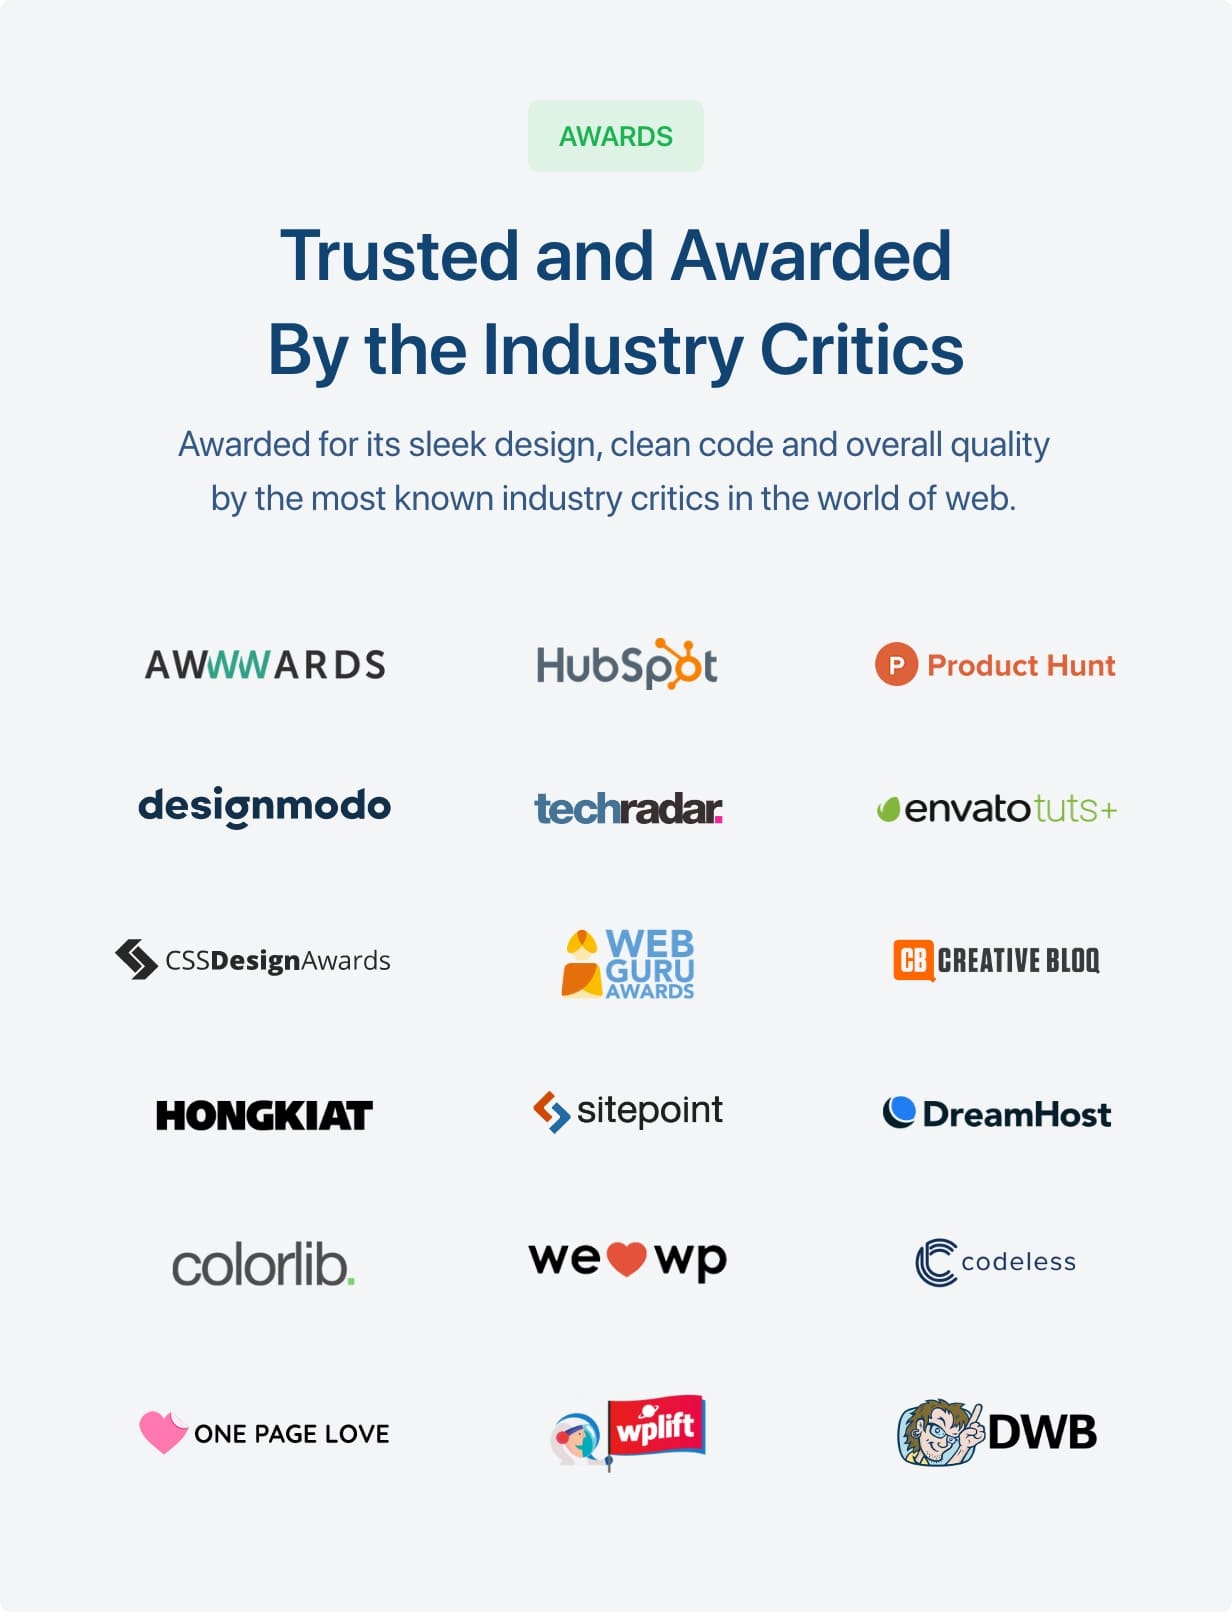 Trusted and Awarded By the Industry Criticts